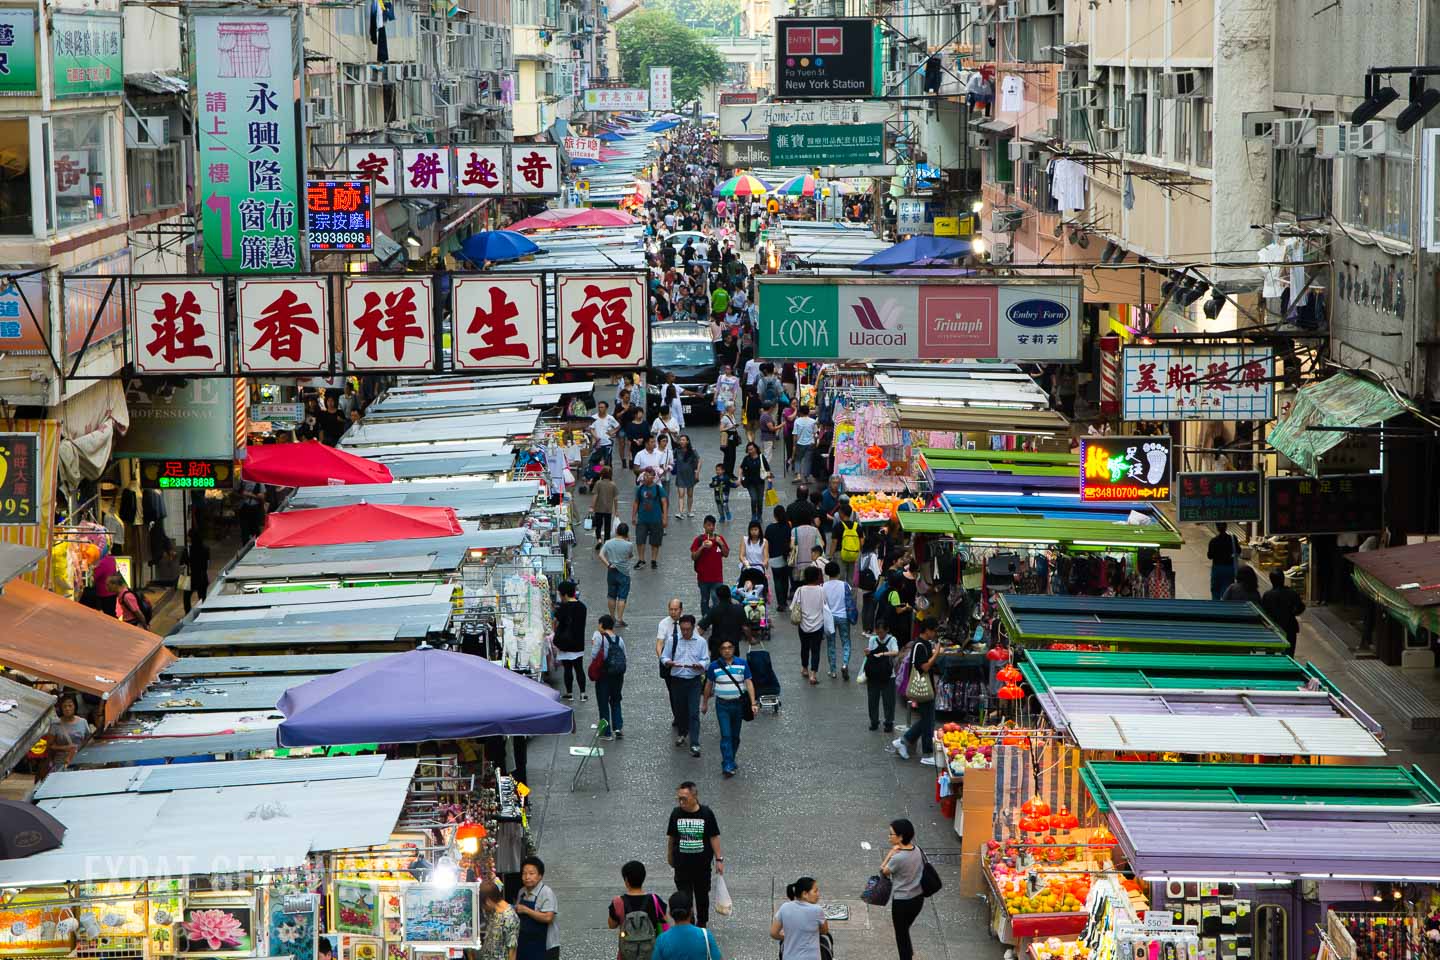 Mong Kok is busy and chaotic, but it is all part of the fun! Expat Getaways, First Time Hong Kong Survival Guide - accommodation. 